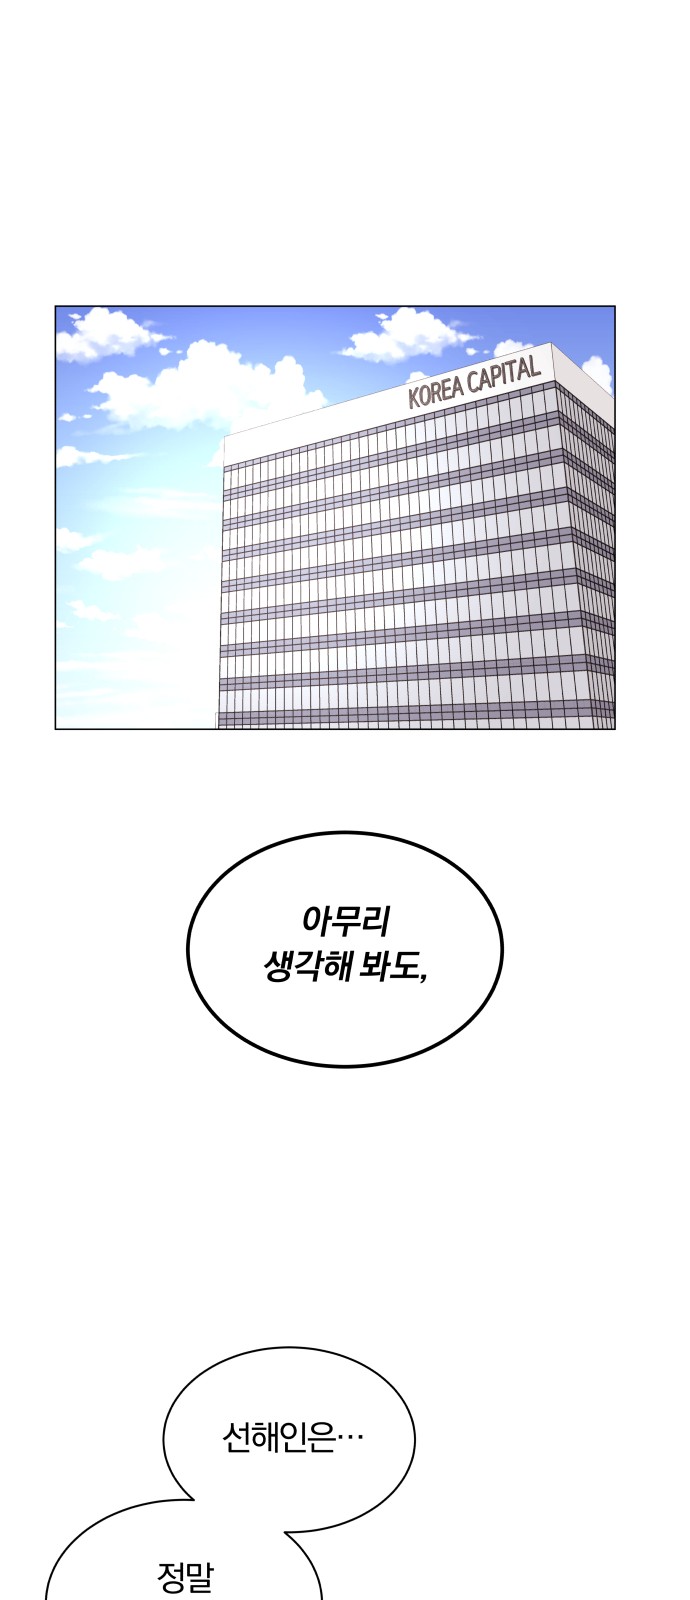 Superstar Cheon Dae-ri - Chapter 8 - Page 1